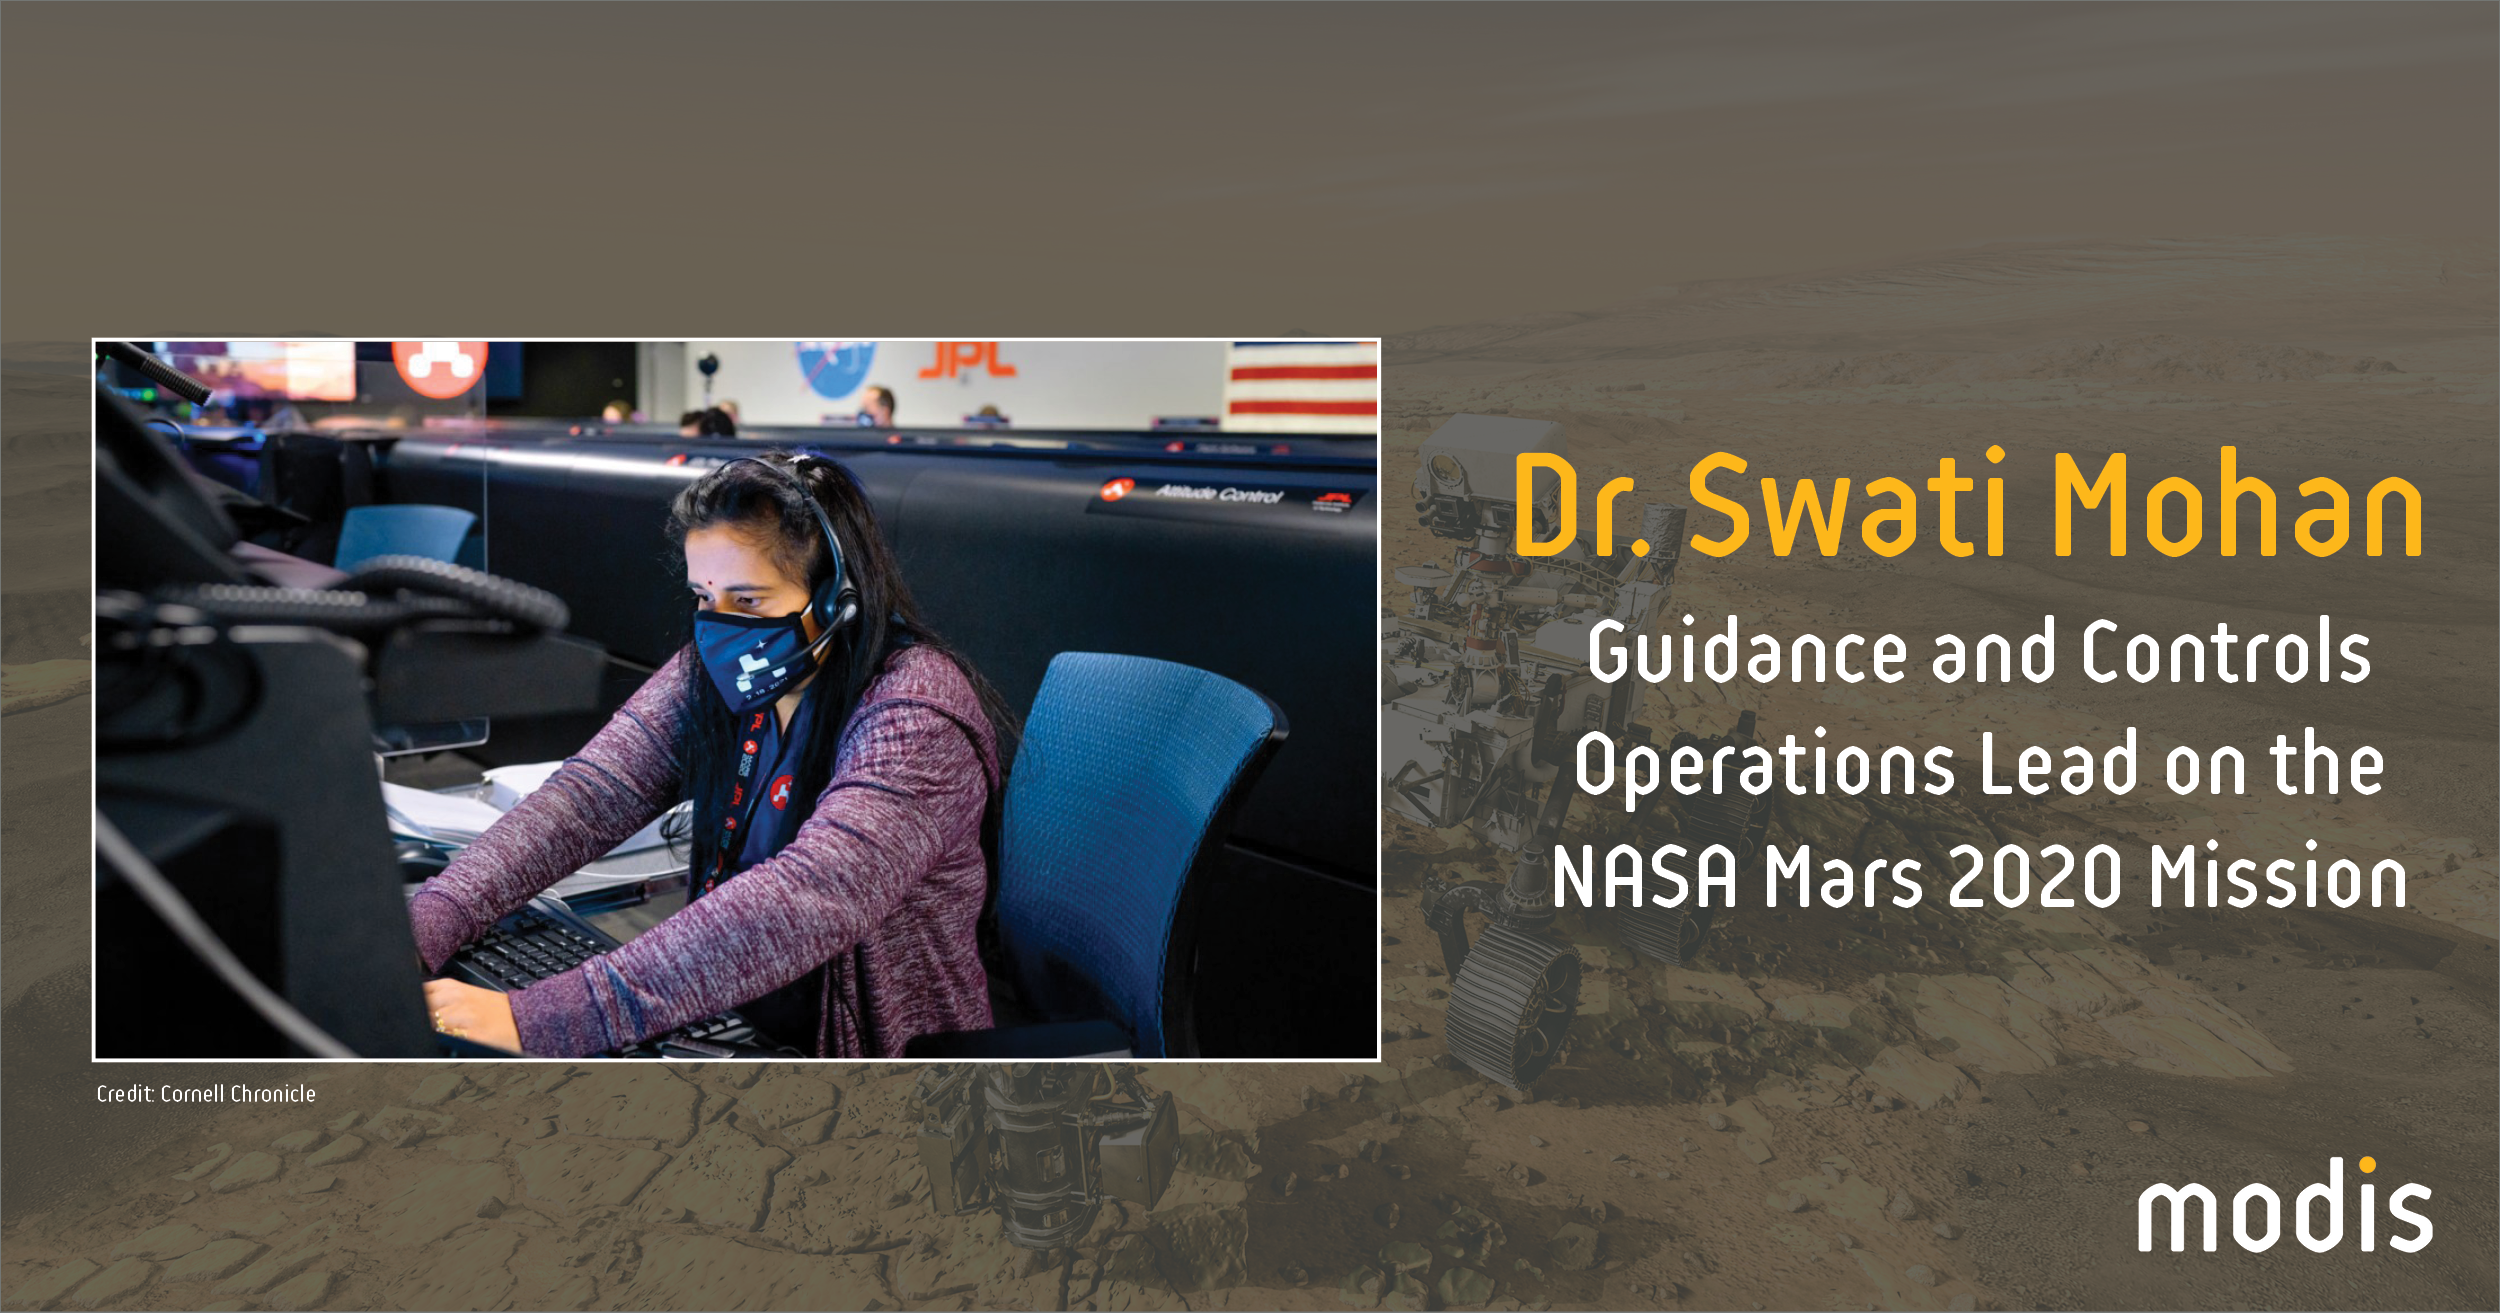 Dr. Swati Mohan, Guidance and Control Operations Lead